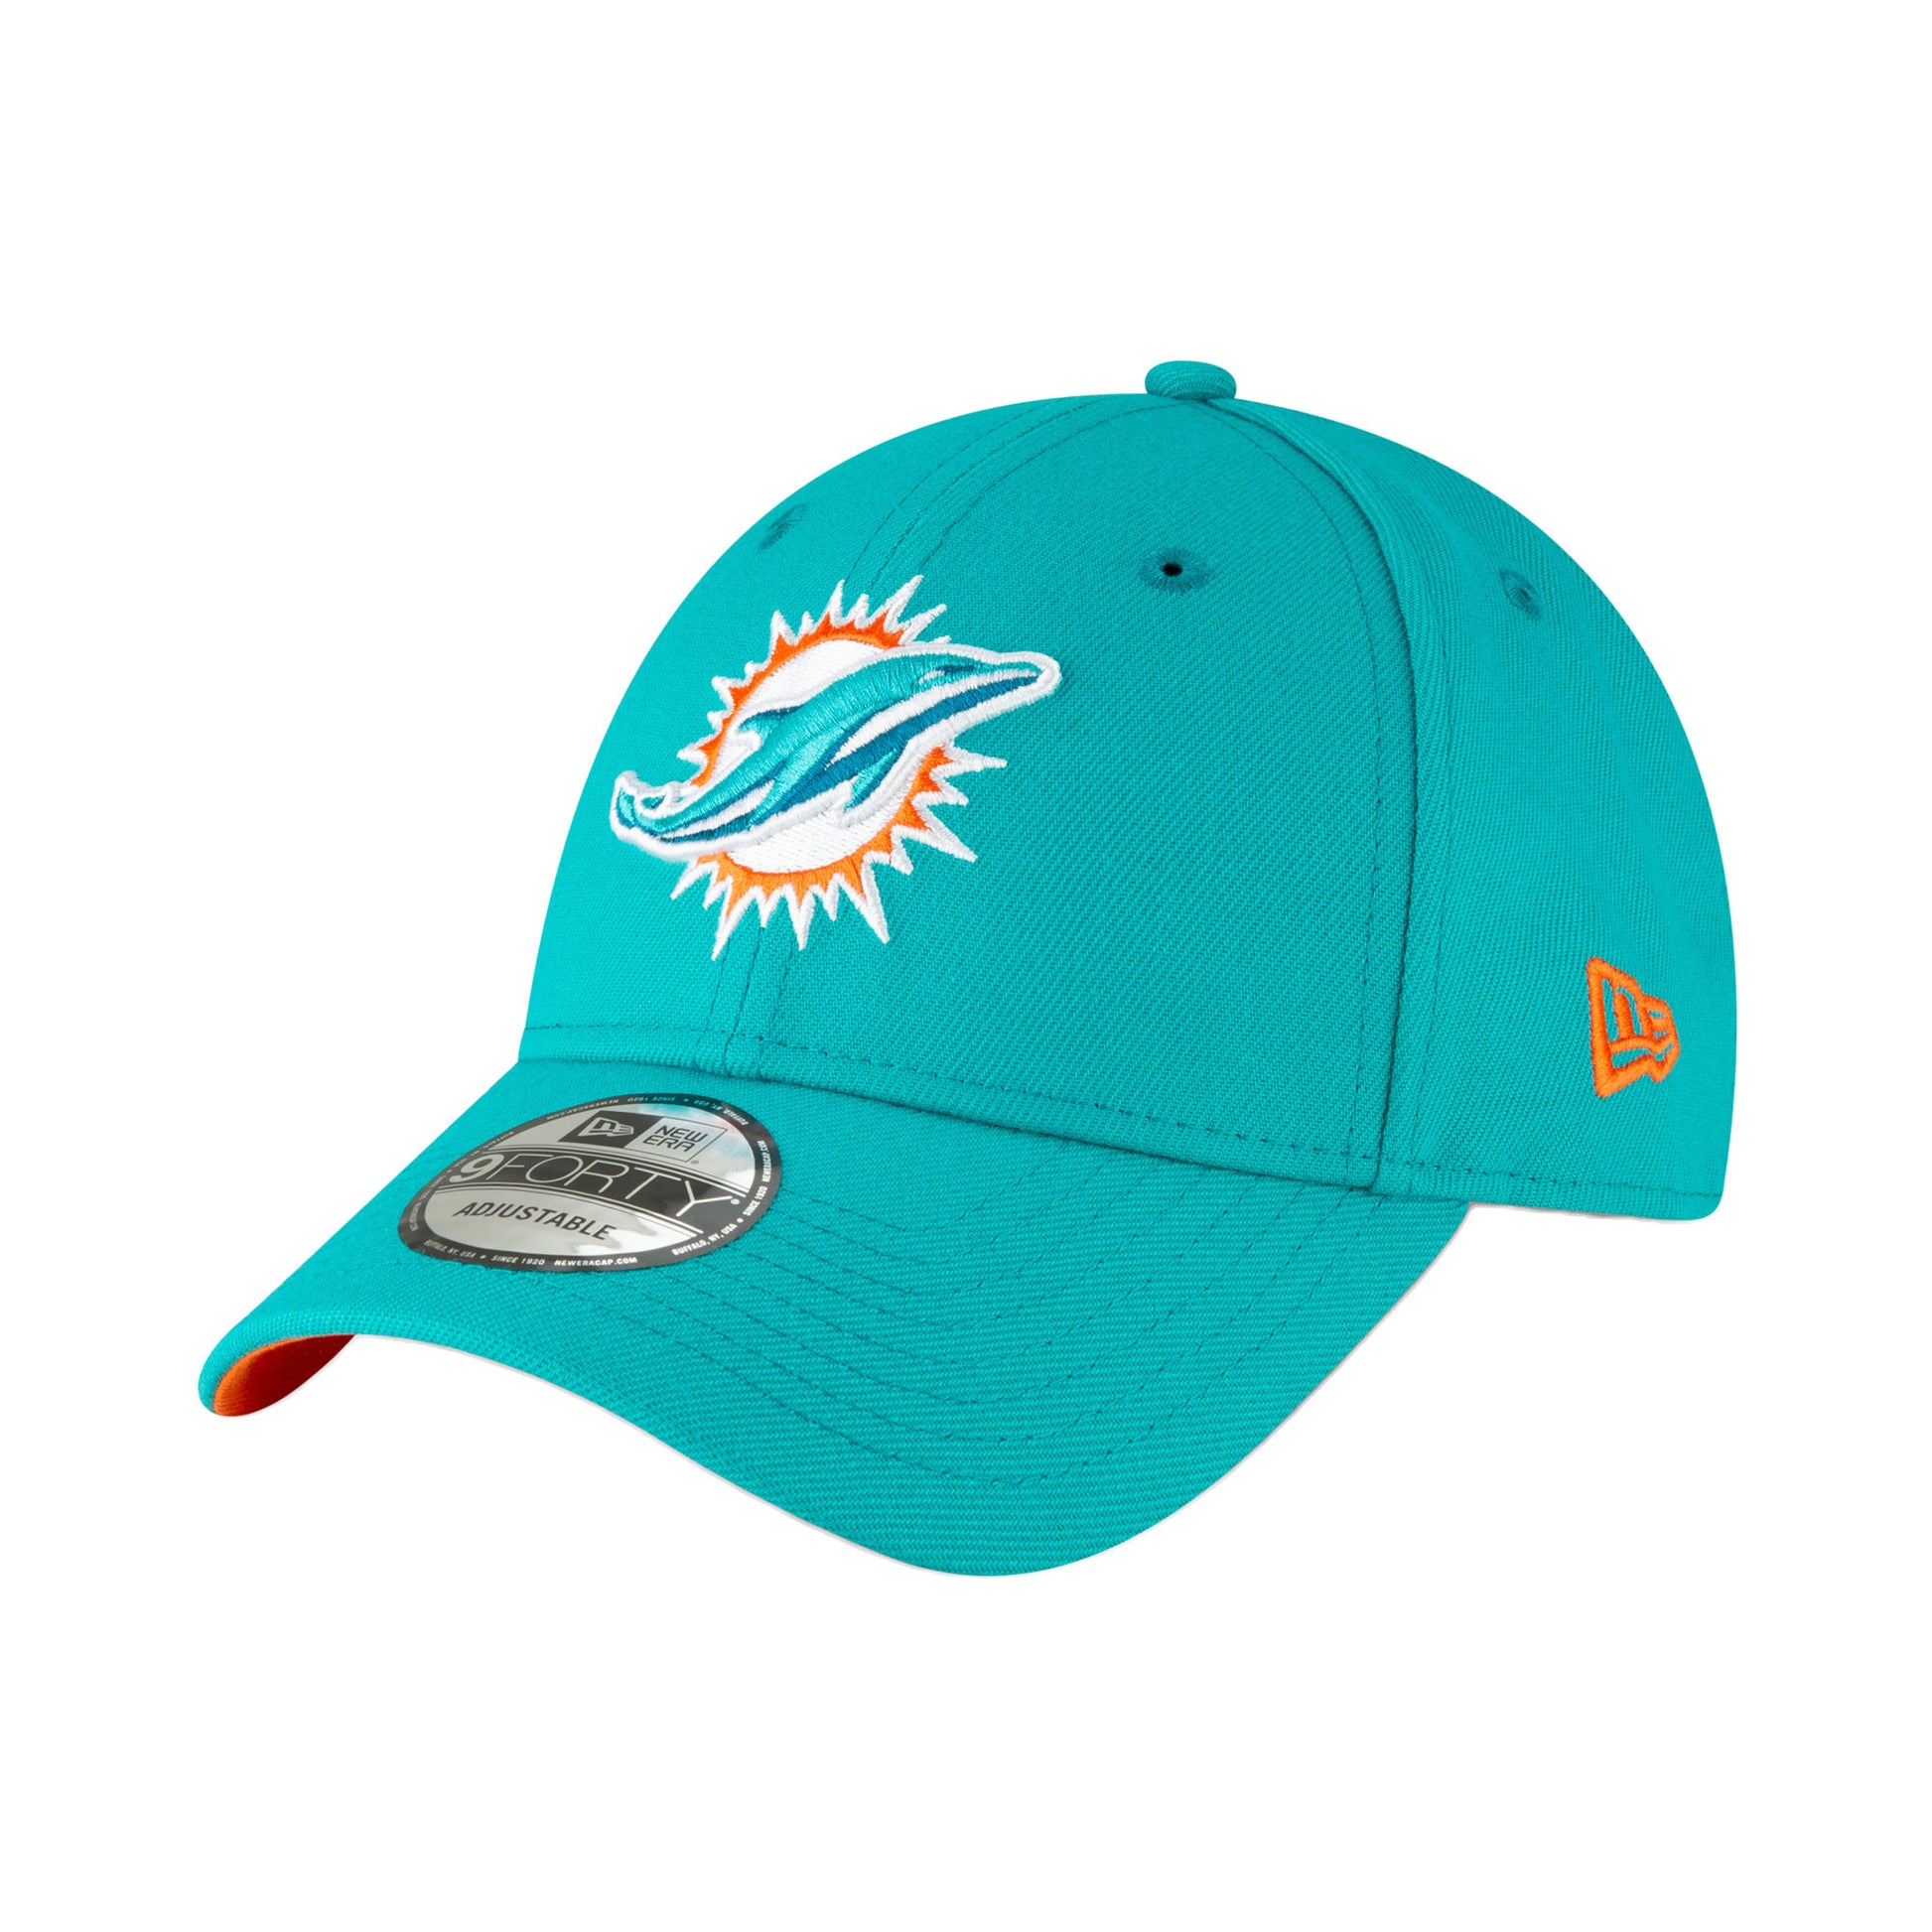 THE LEAGUE Miami Dolphins 9FORTY New Era Cap – JustFitteds